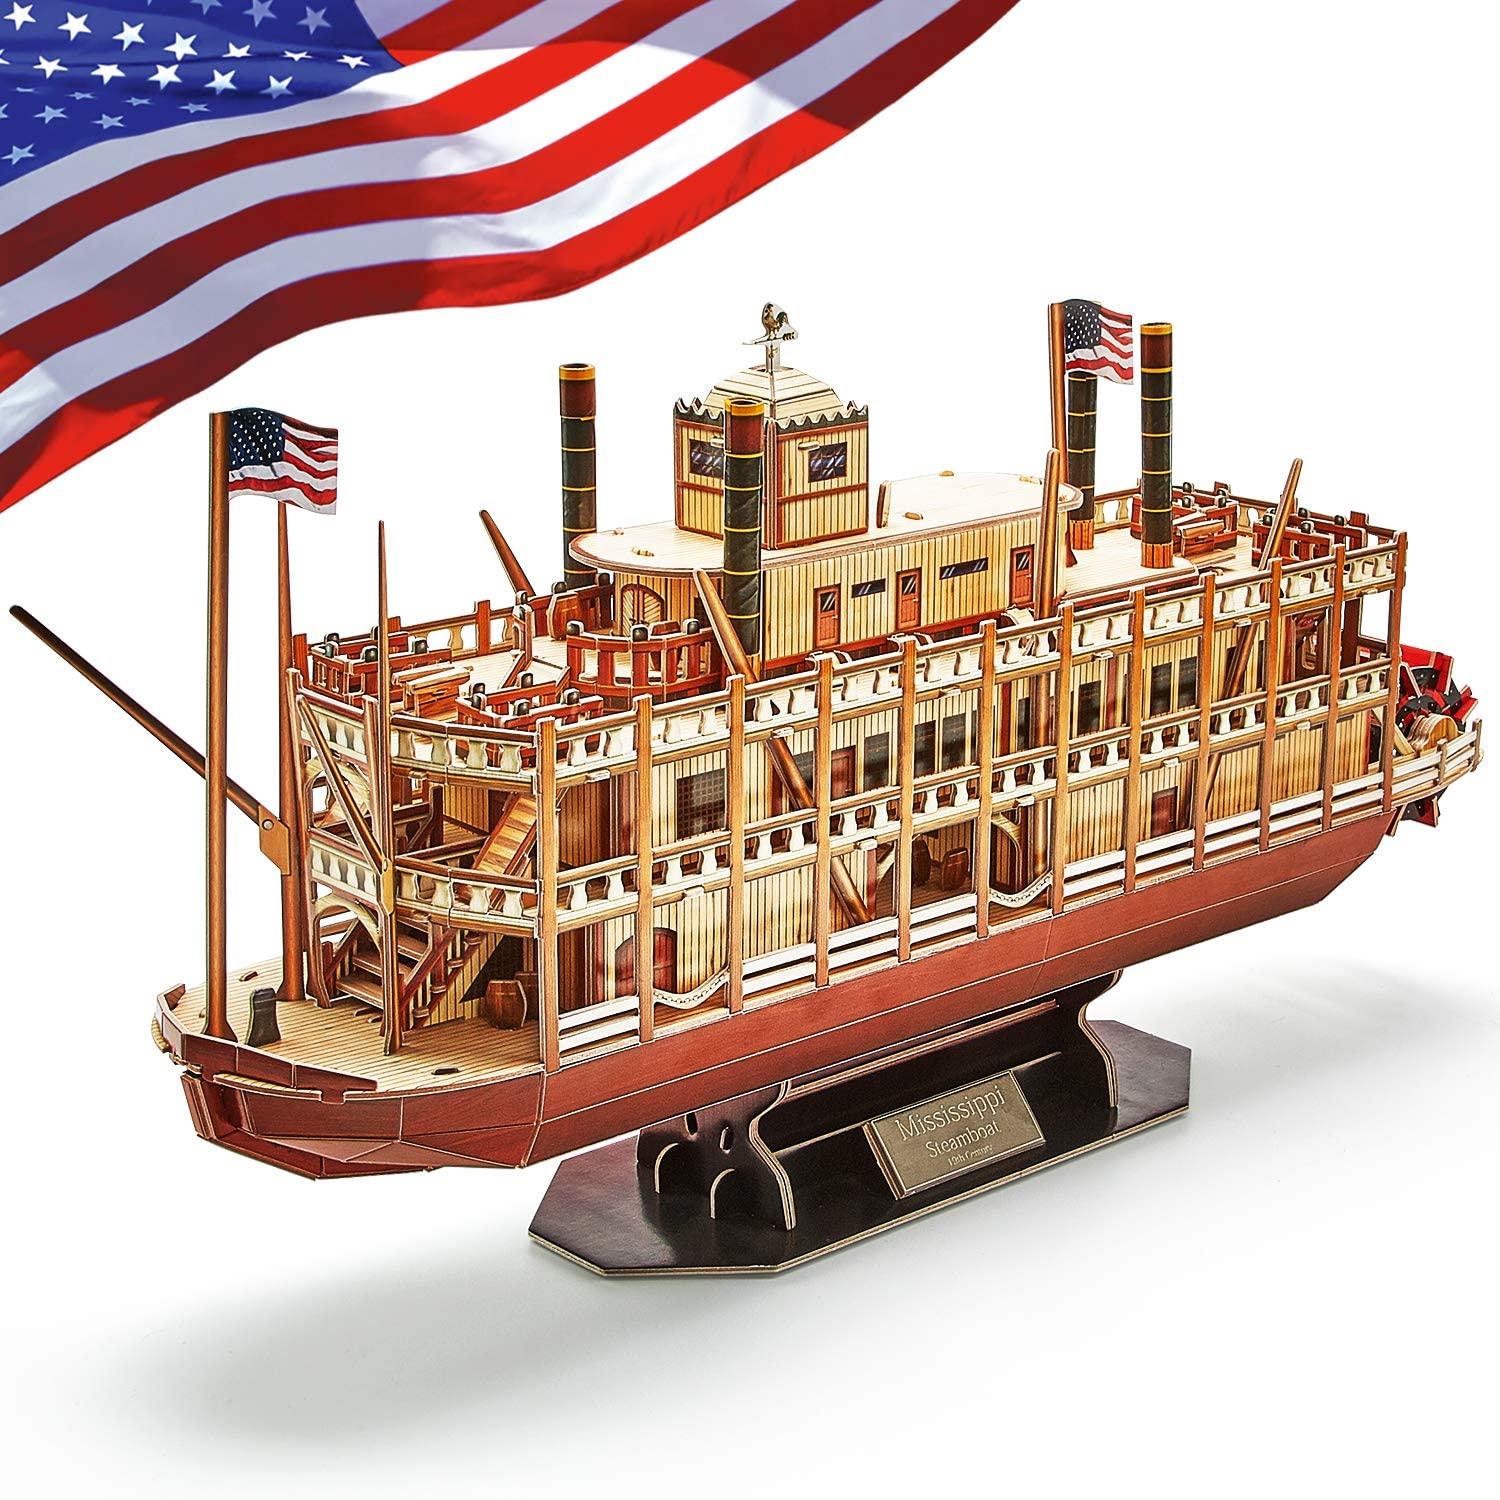 CubicFun 3D Mississippi Steamboat Foam Puzzle Kit for $13.49 Shipped